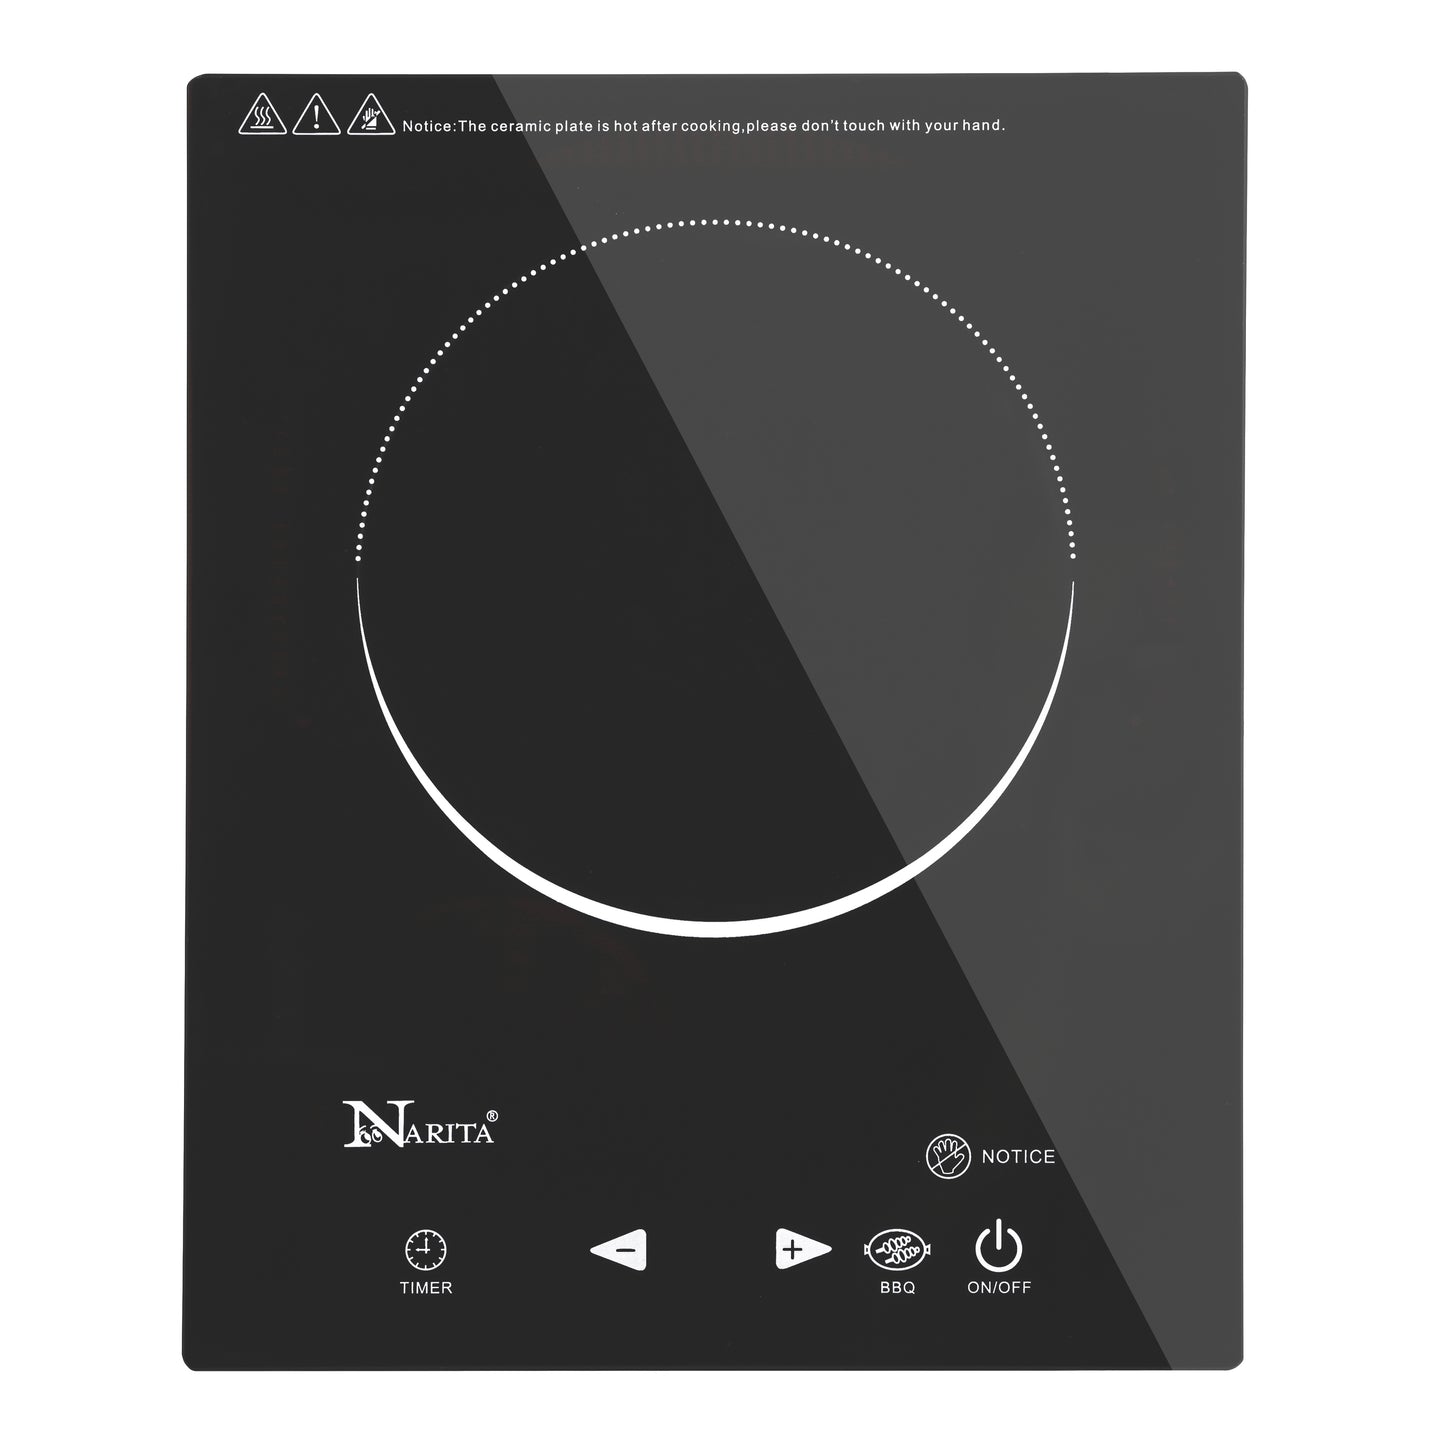 Radiant Cooktop / 1500W